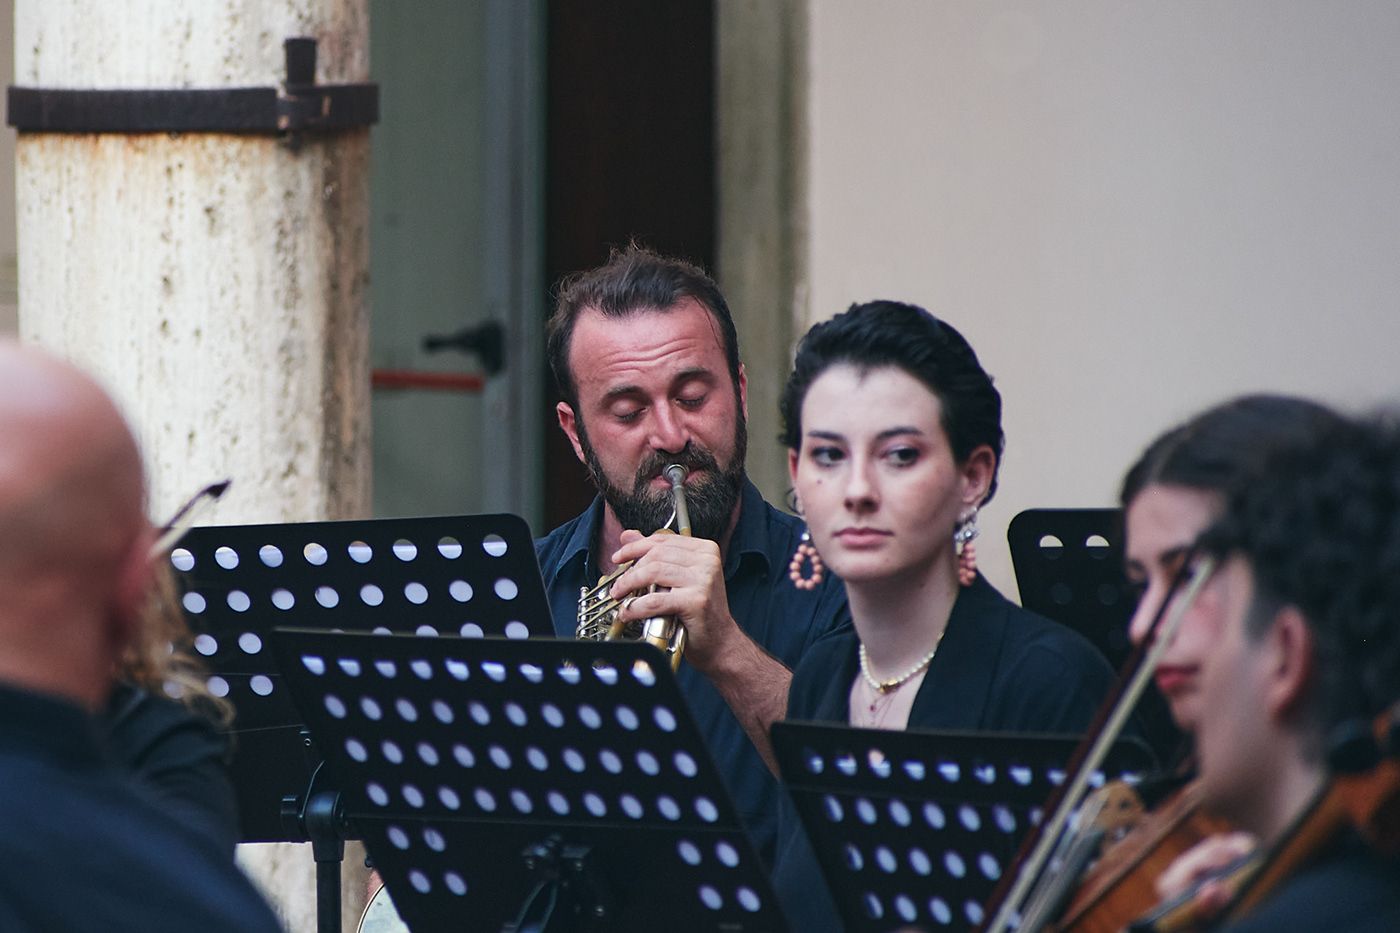 Musical Instrument orchestra perugia umbria Italy Photography  photoshoot beauty